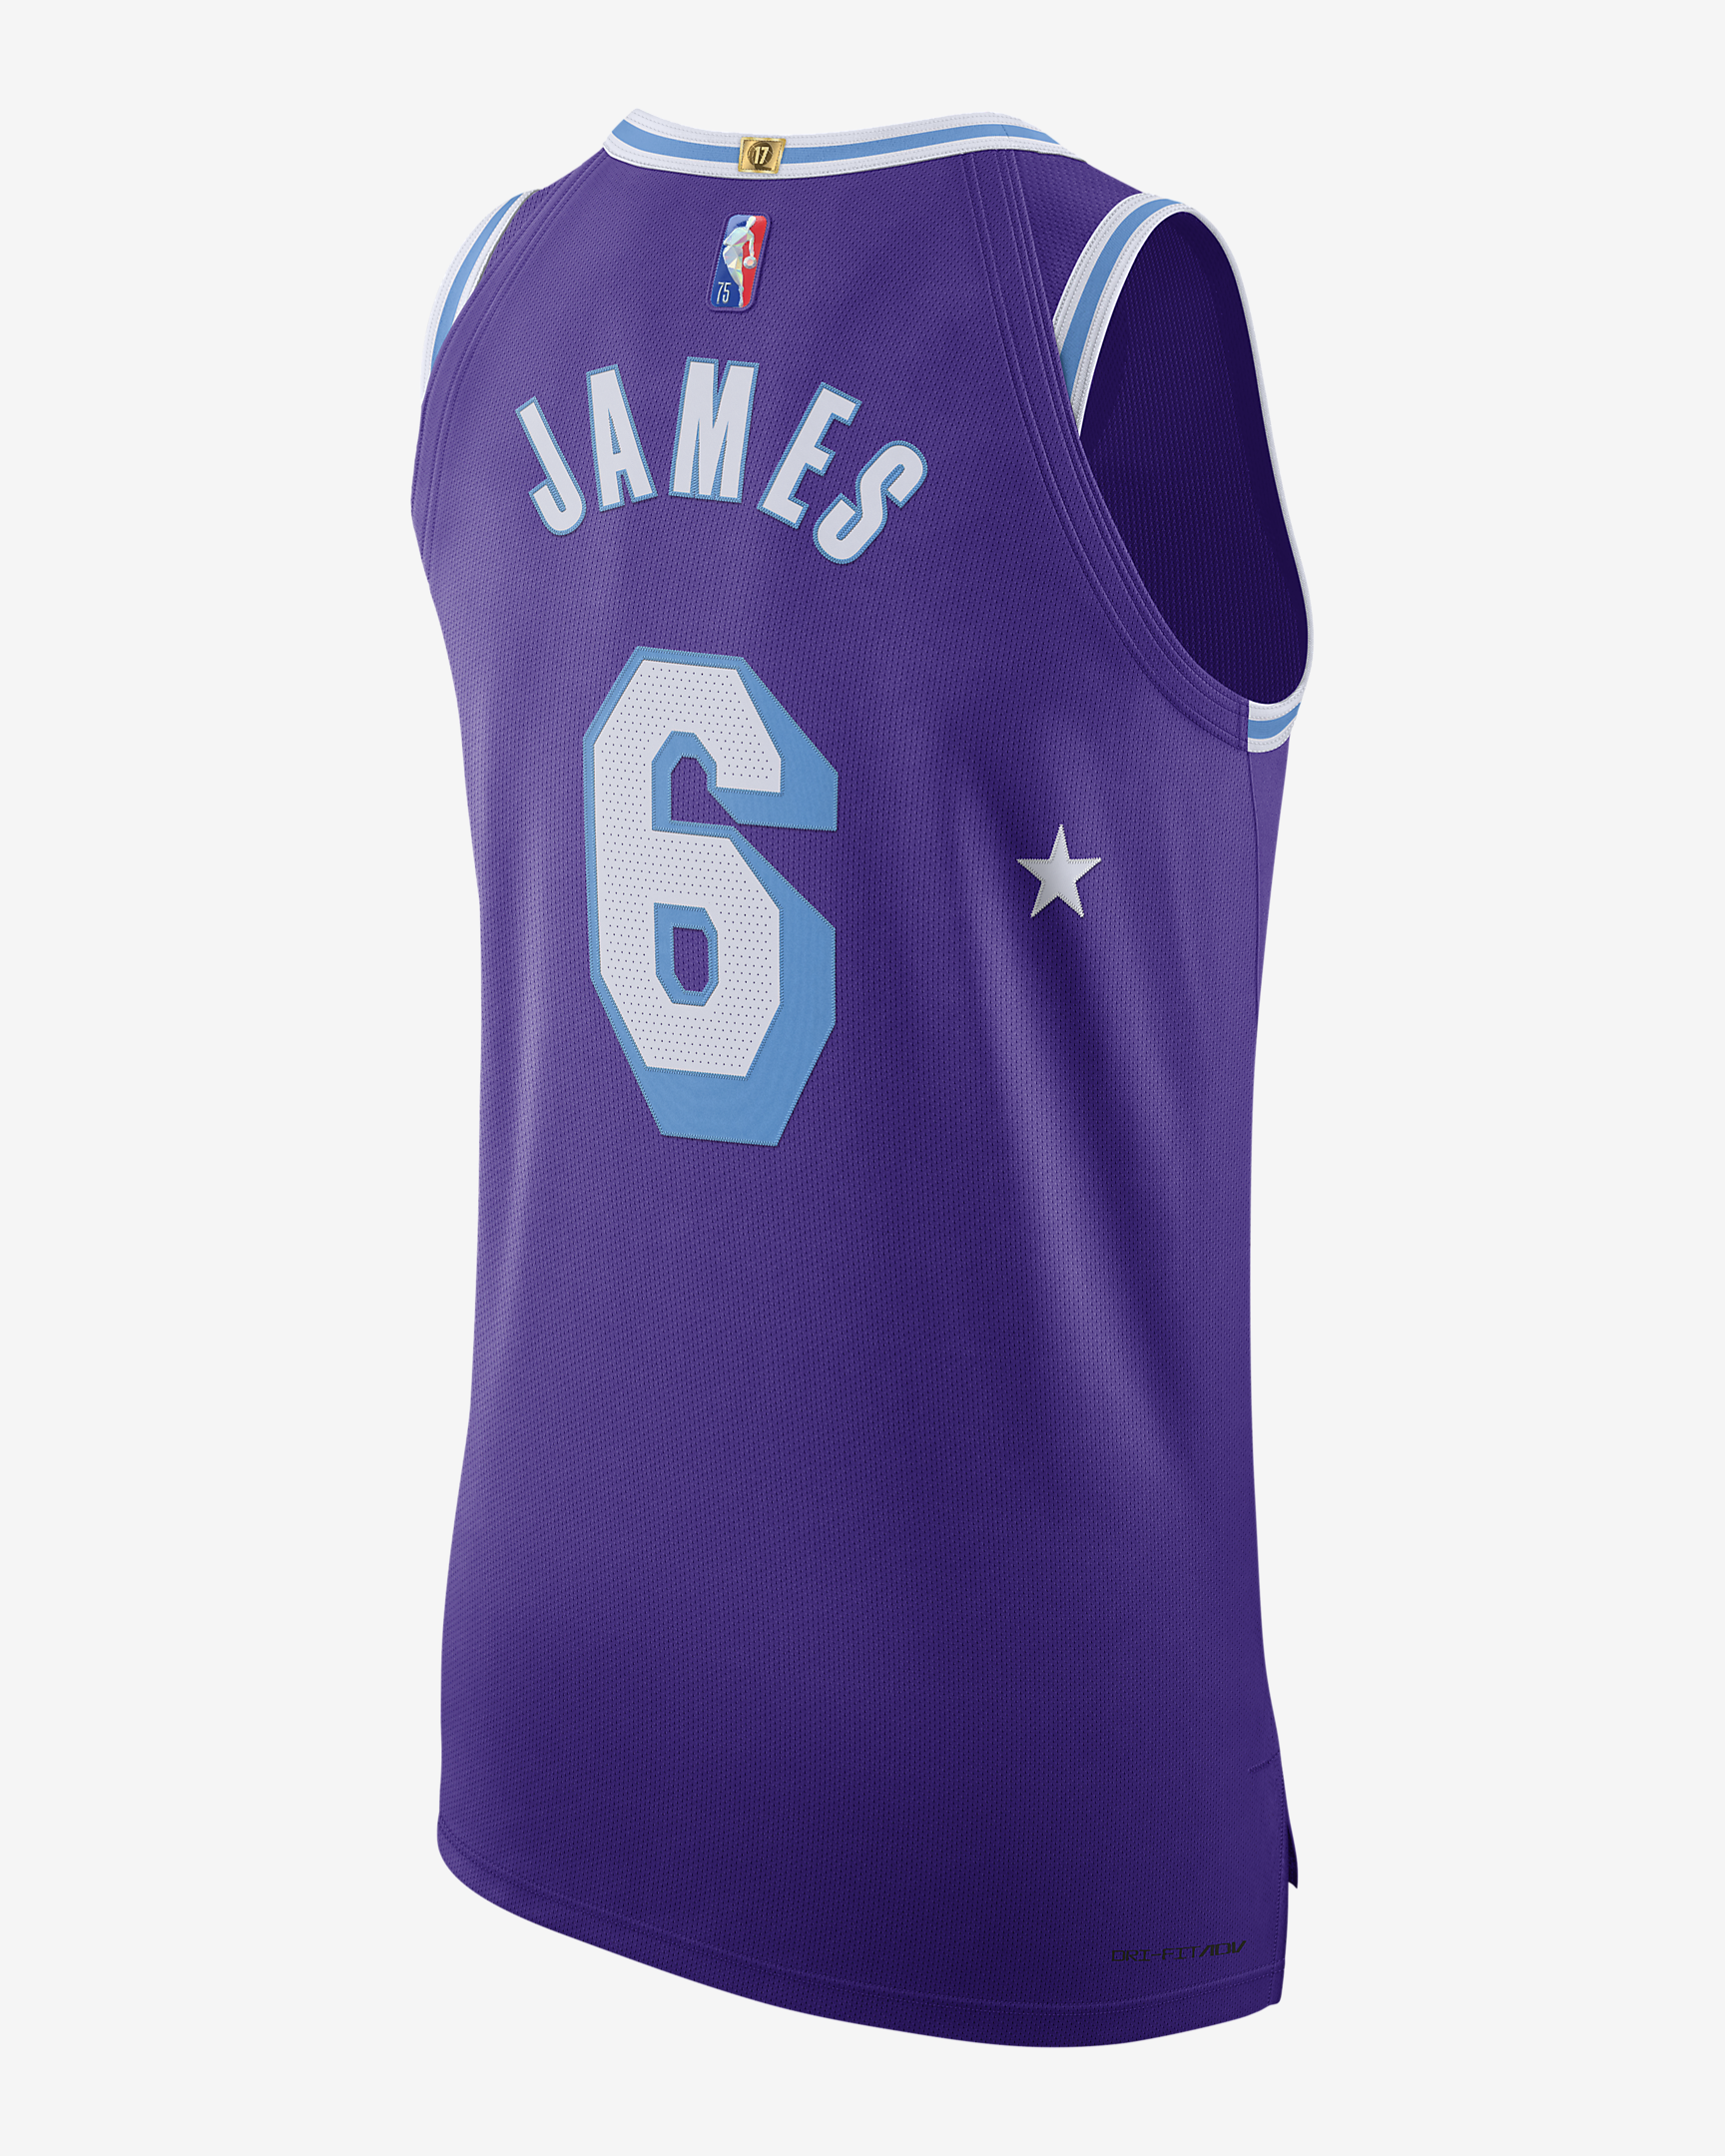 los-angeles-lakers-city-edition-dri-fit-adv-nba-authentic-jersey-3QM76z.png